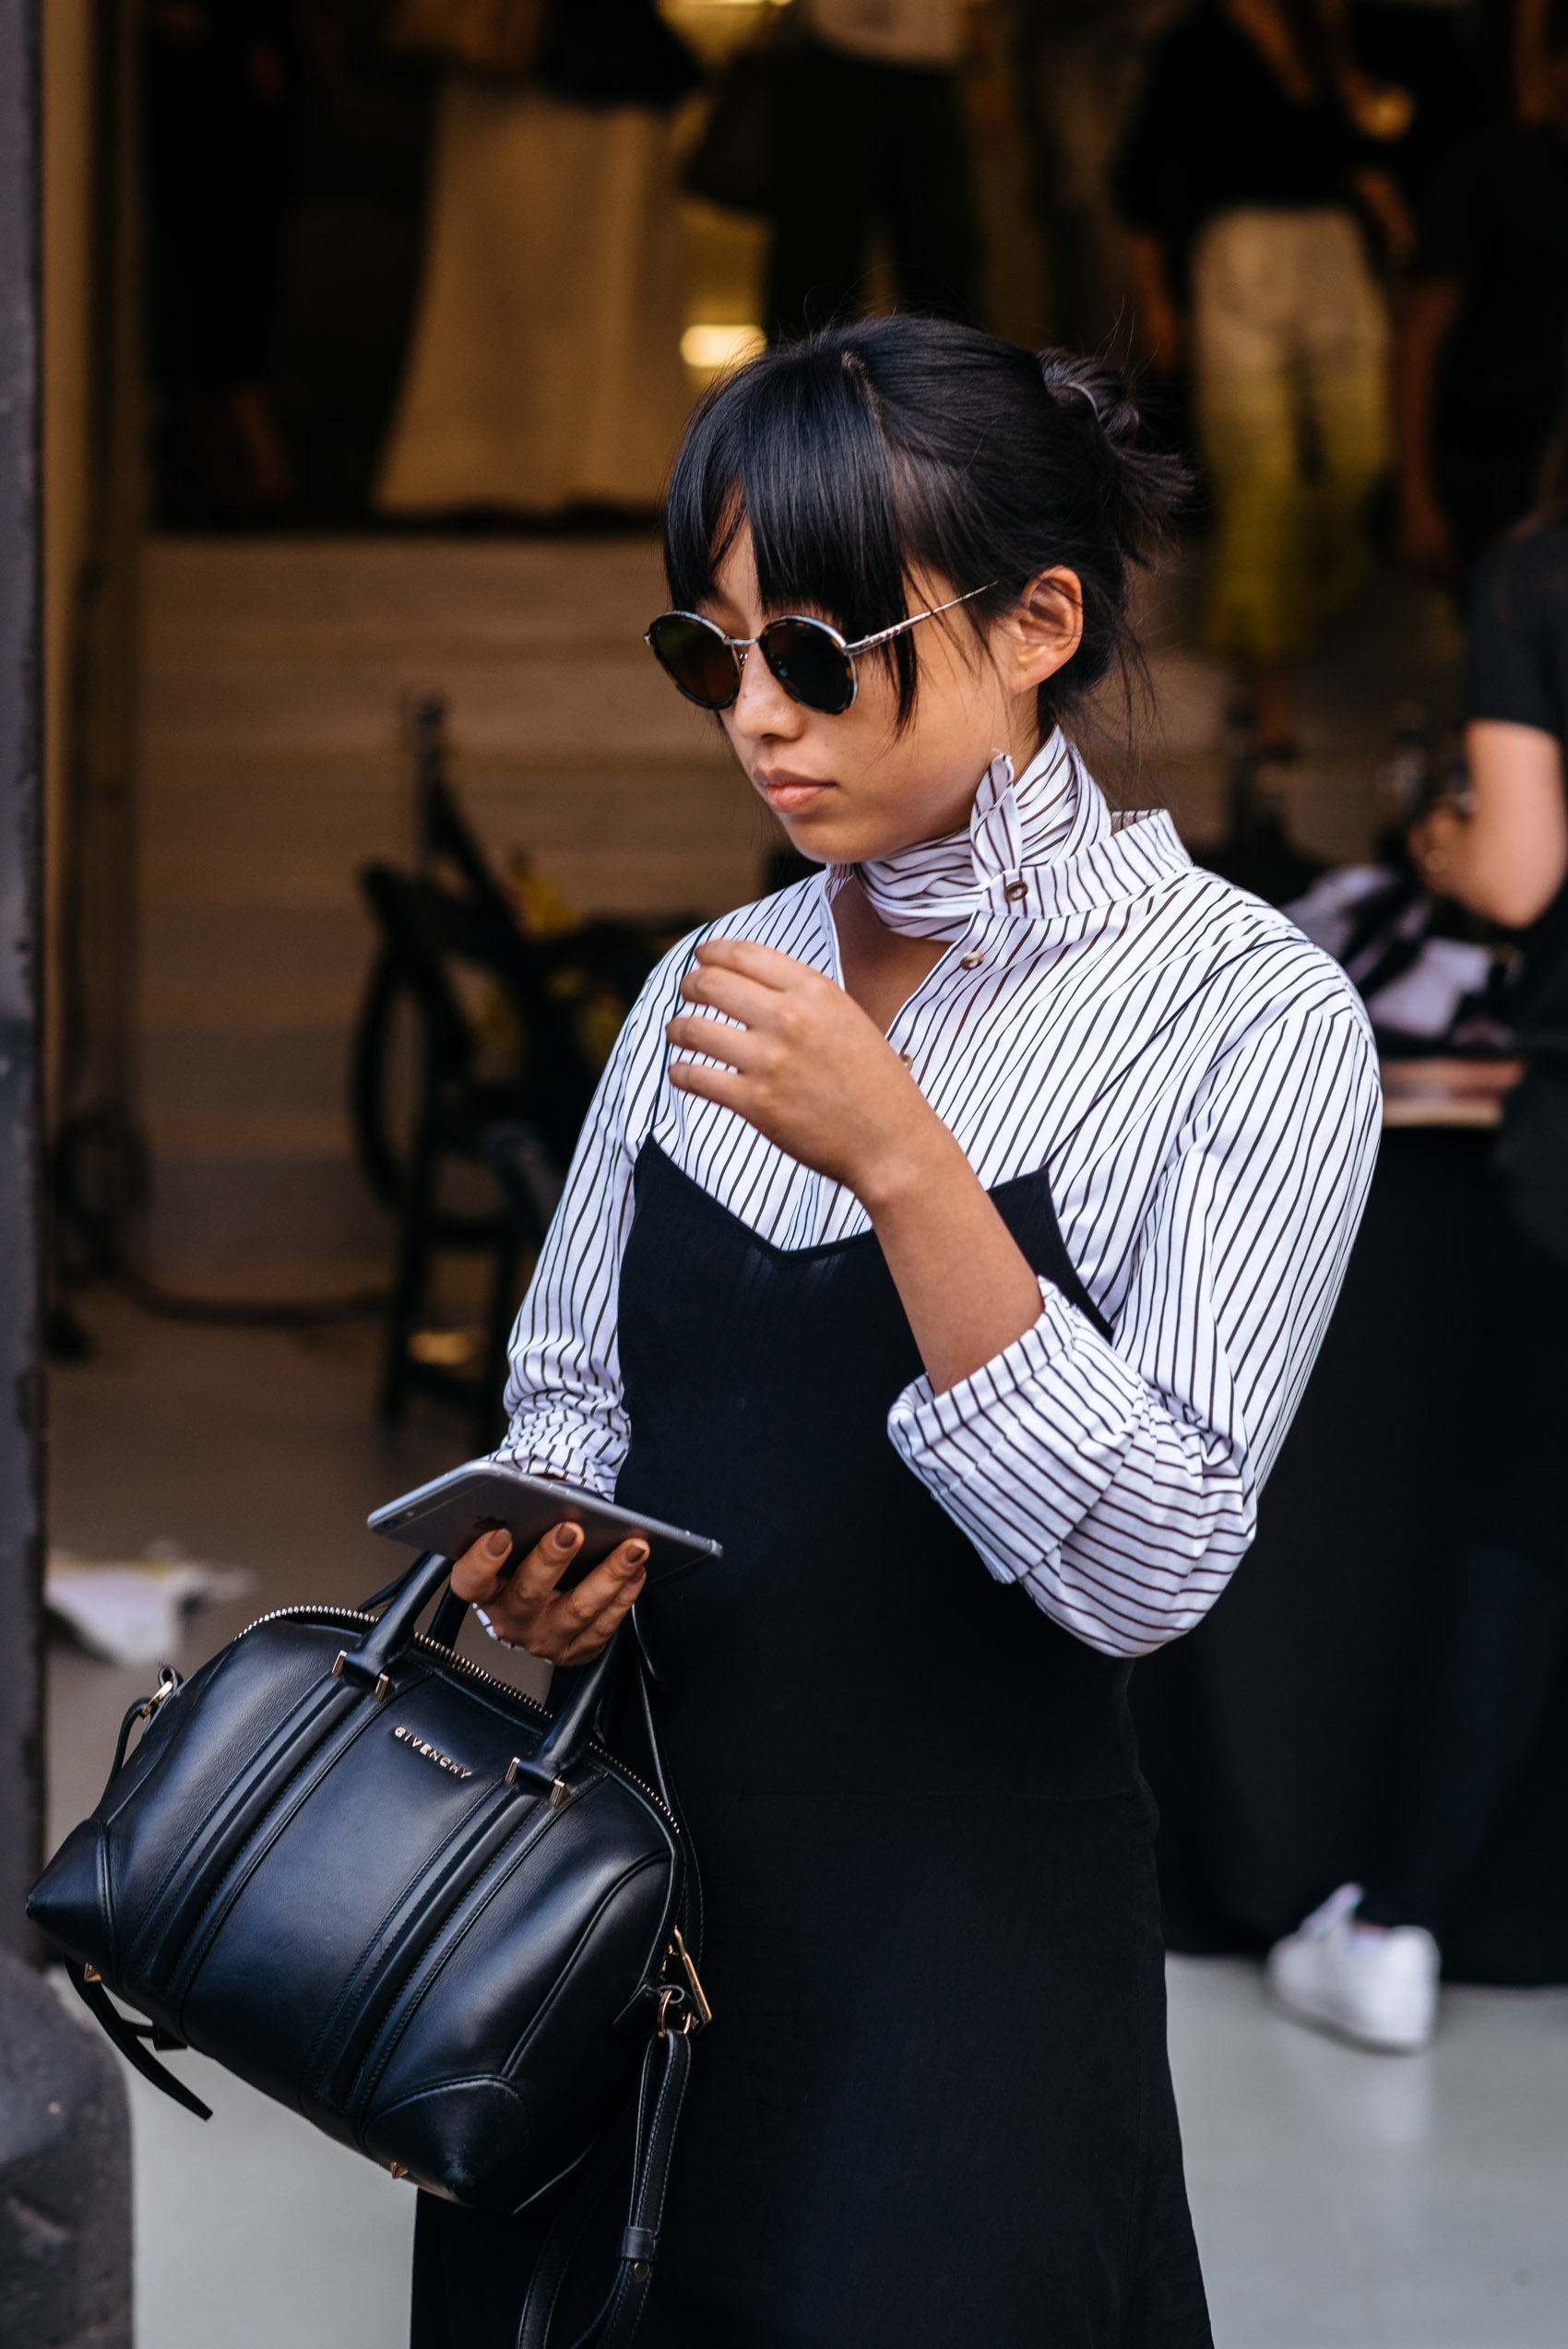 Margaret Zhang street style in NYFW after Phillip Lim SS17